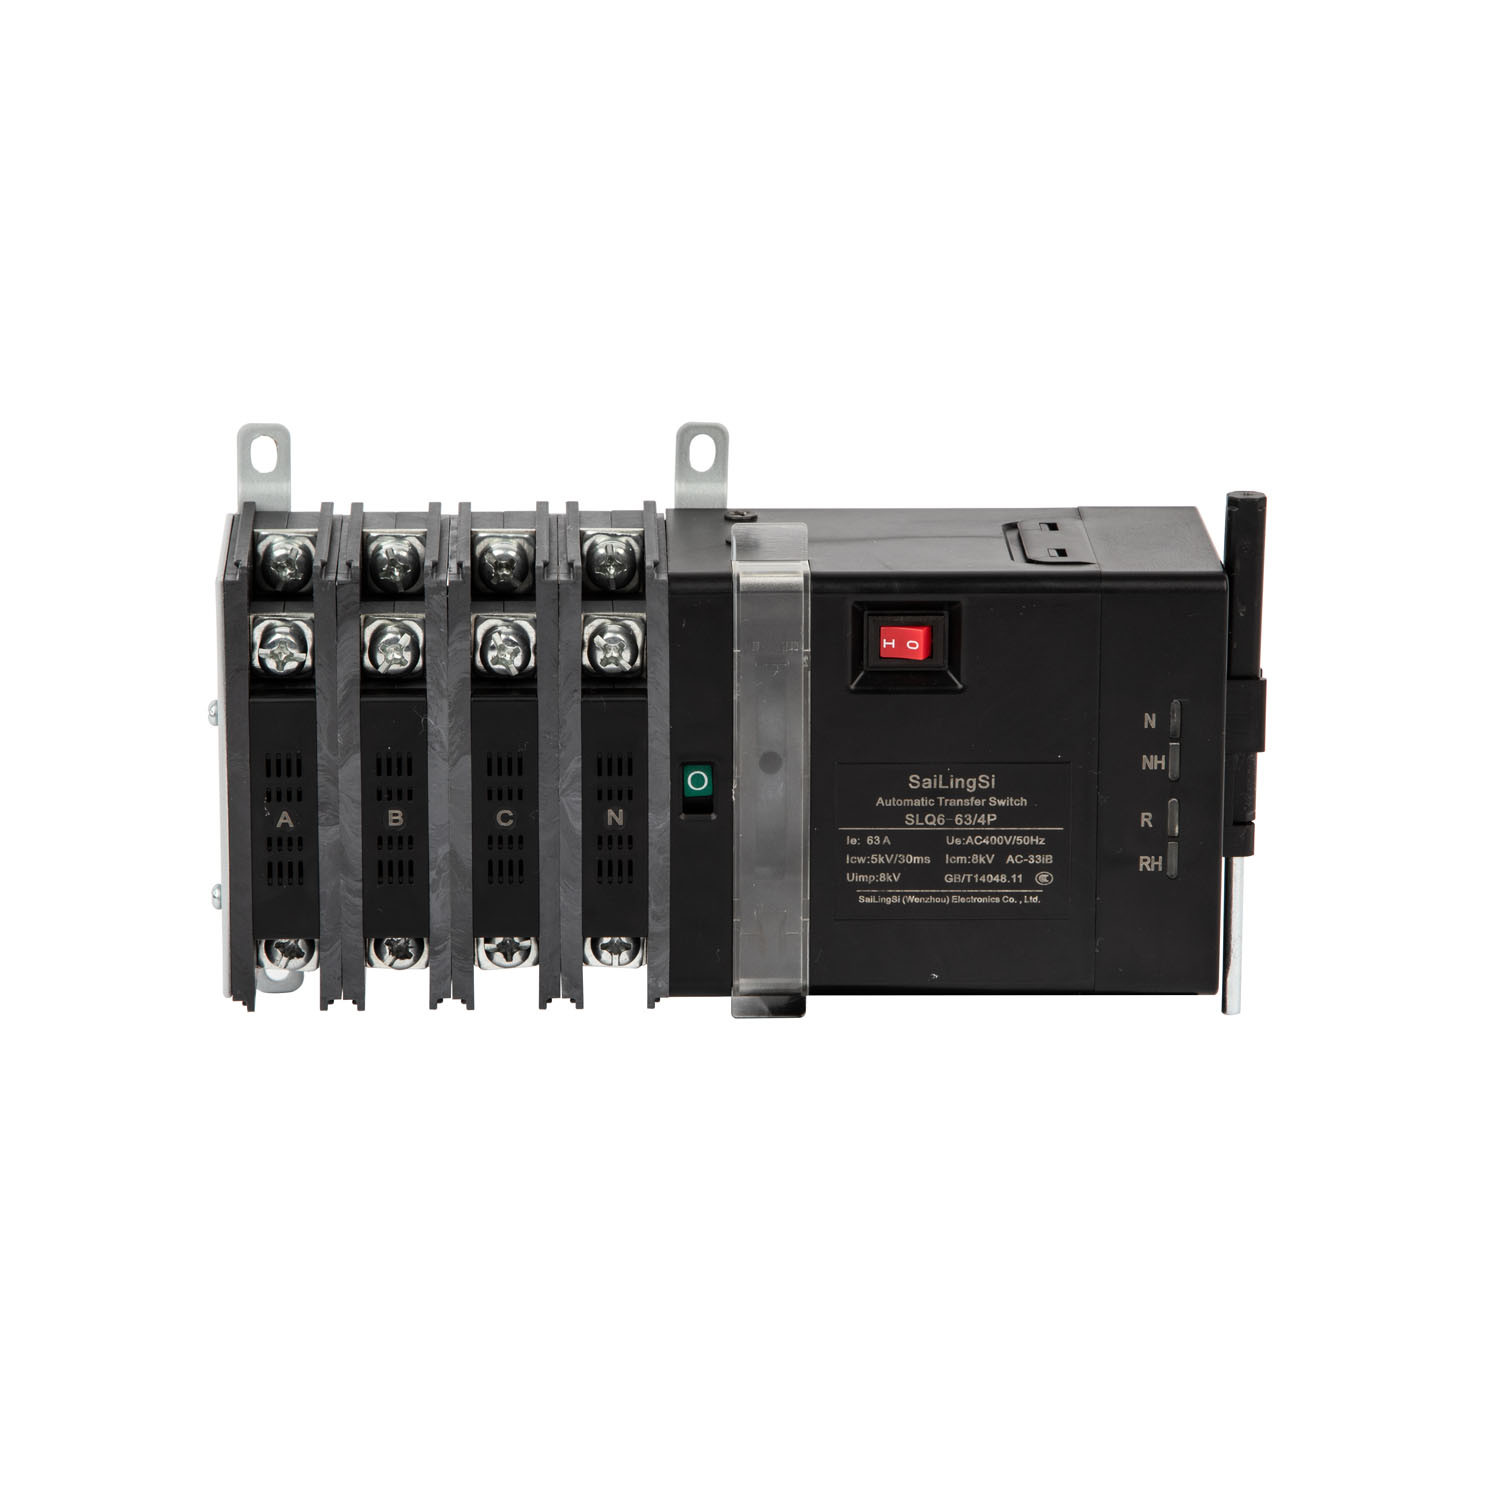 Solar Power to City Power ATS 630A 4p Automatic Transfer Switch ATS with Fire Control